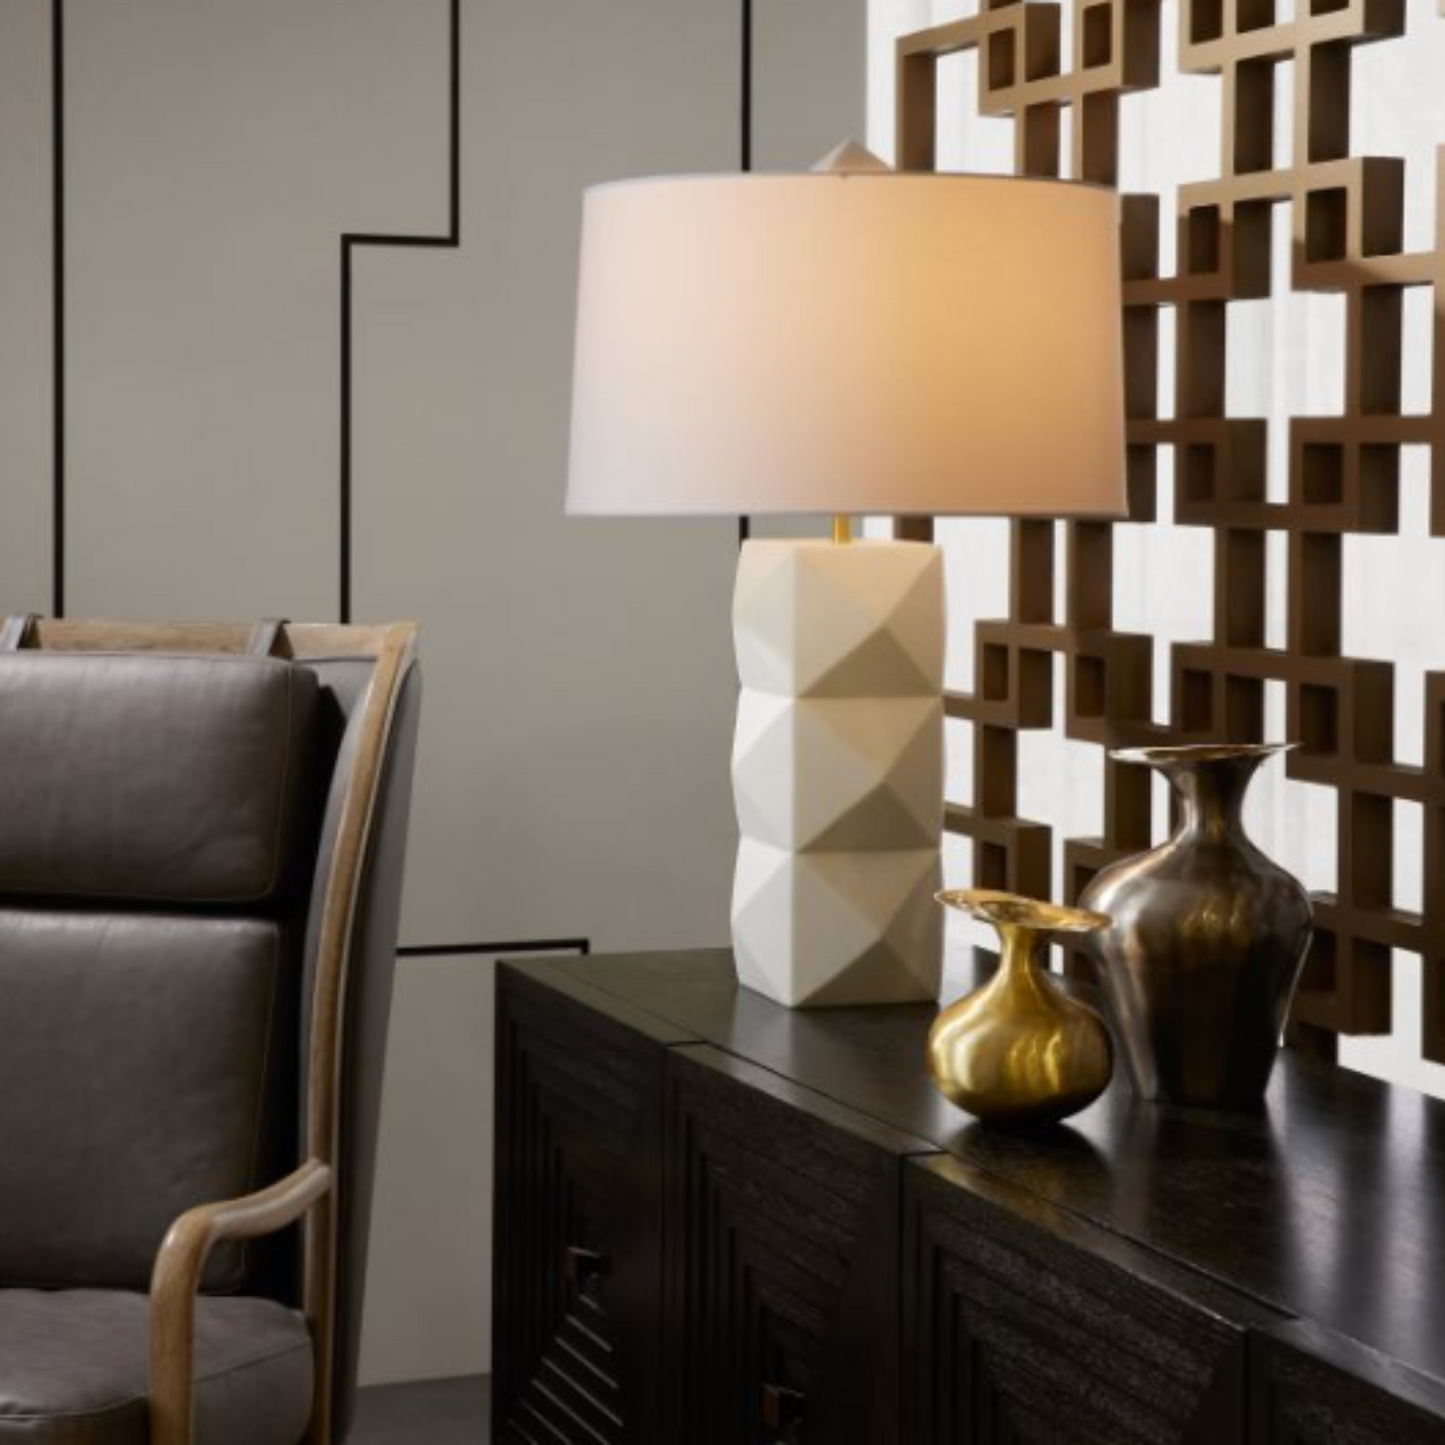 Steele Lamp - Ivory Riverstone Composite, Faceted Facade